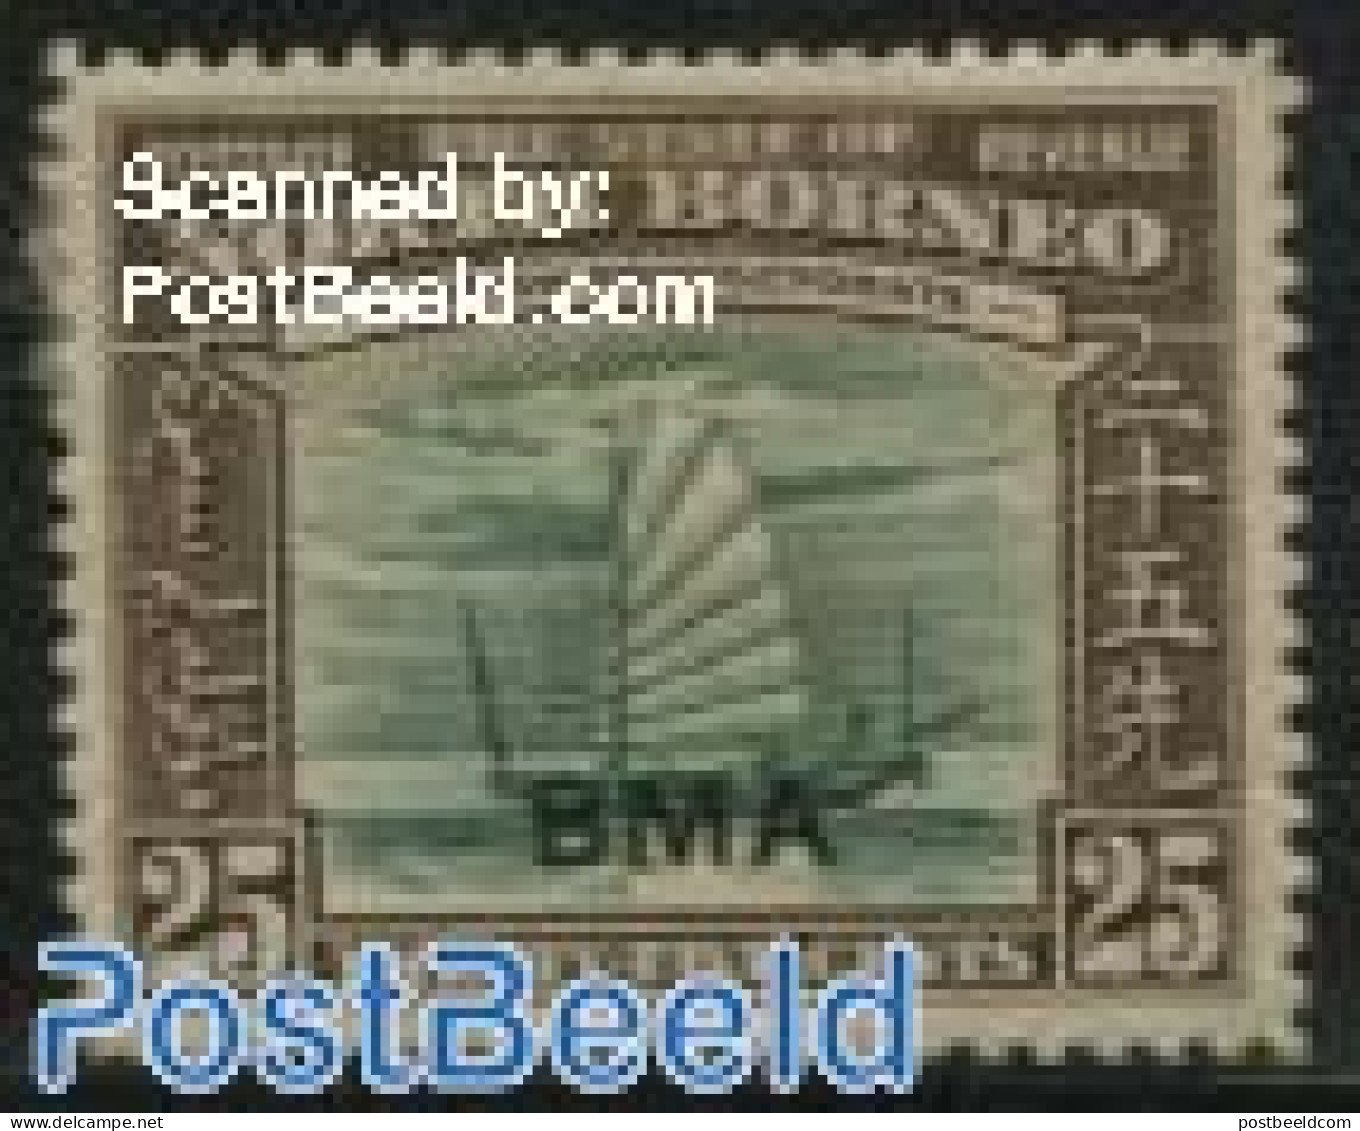 North Borneo 1945 25c, Stamp Out Of Set, Mint NH, Transport - Ships And Boats - Ships